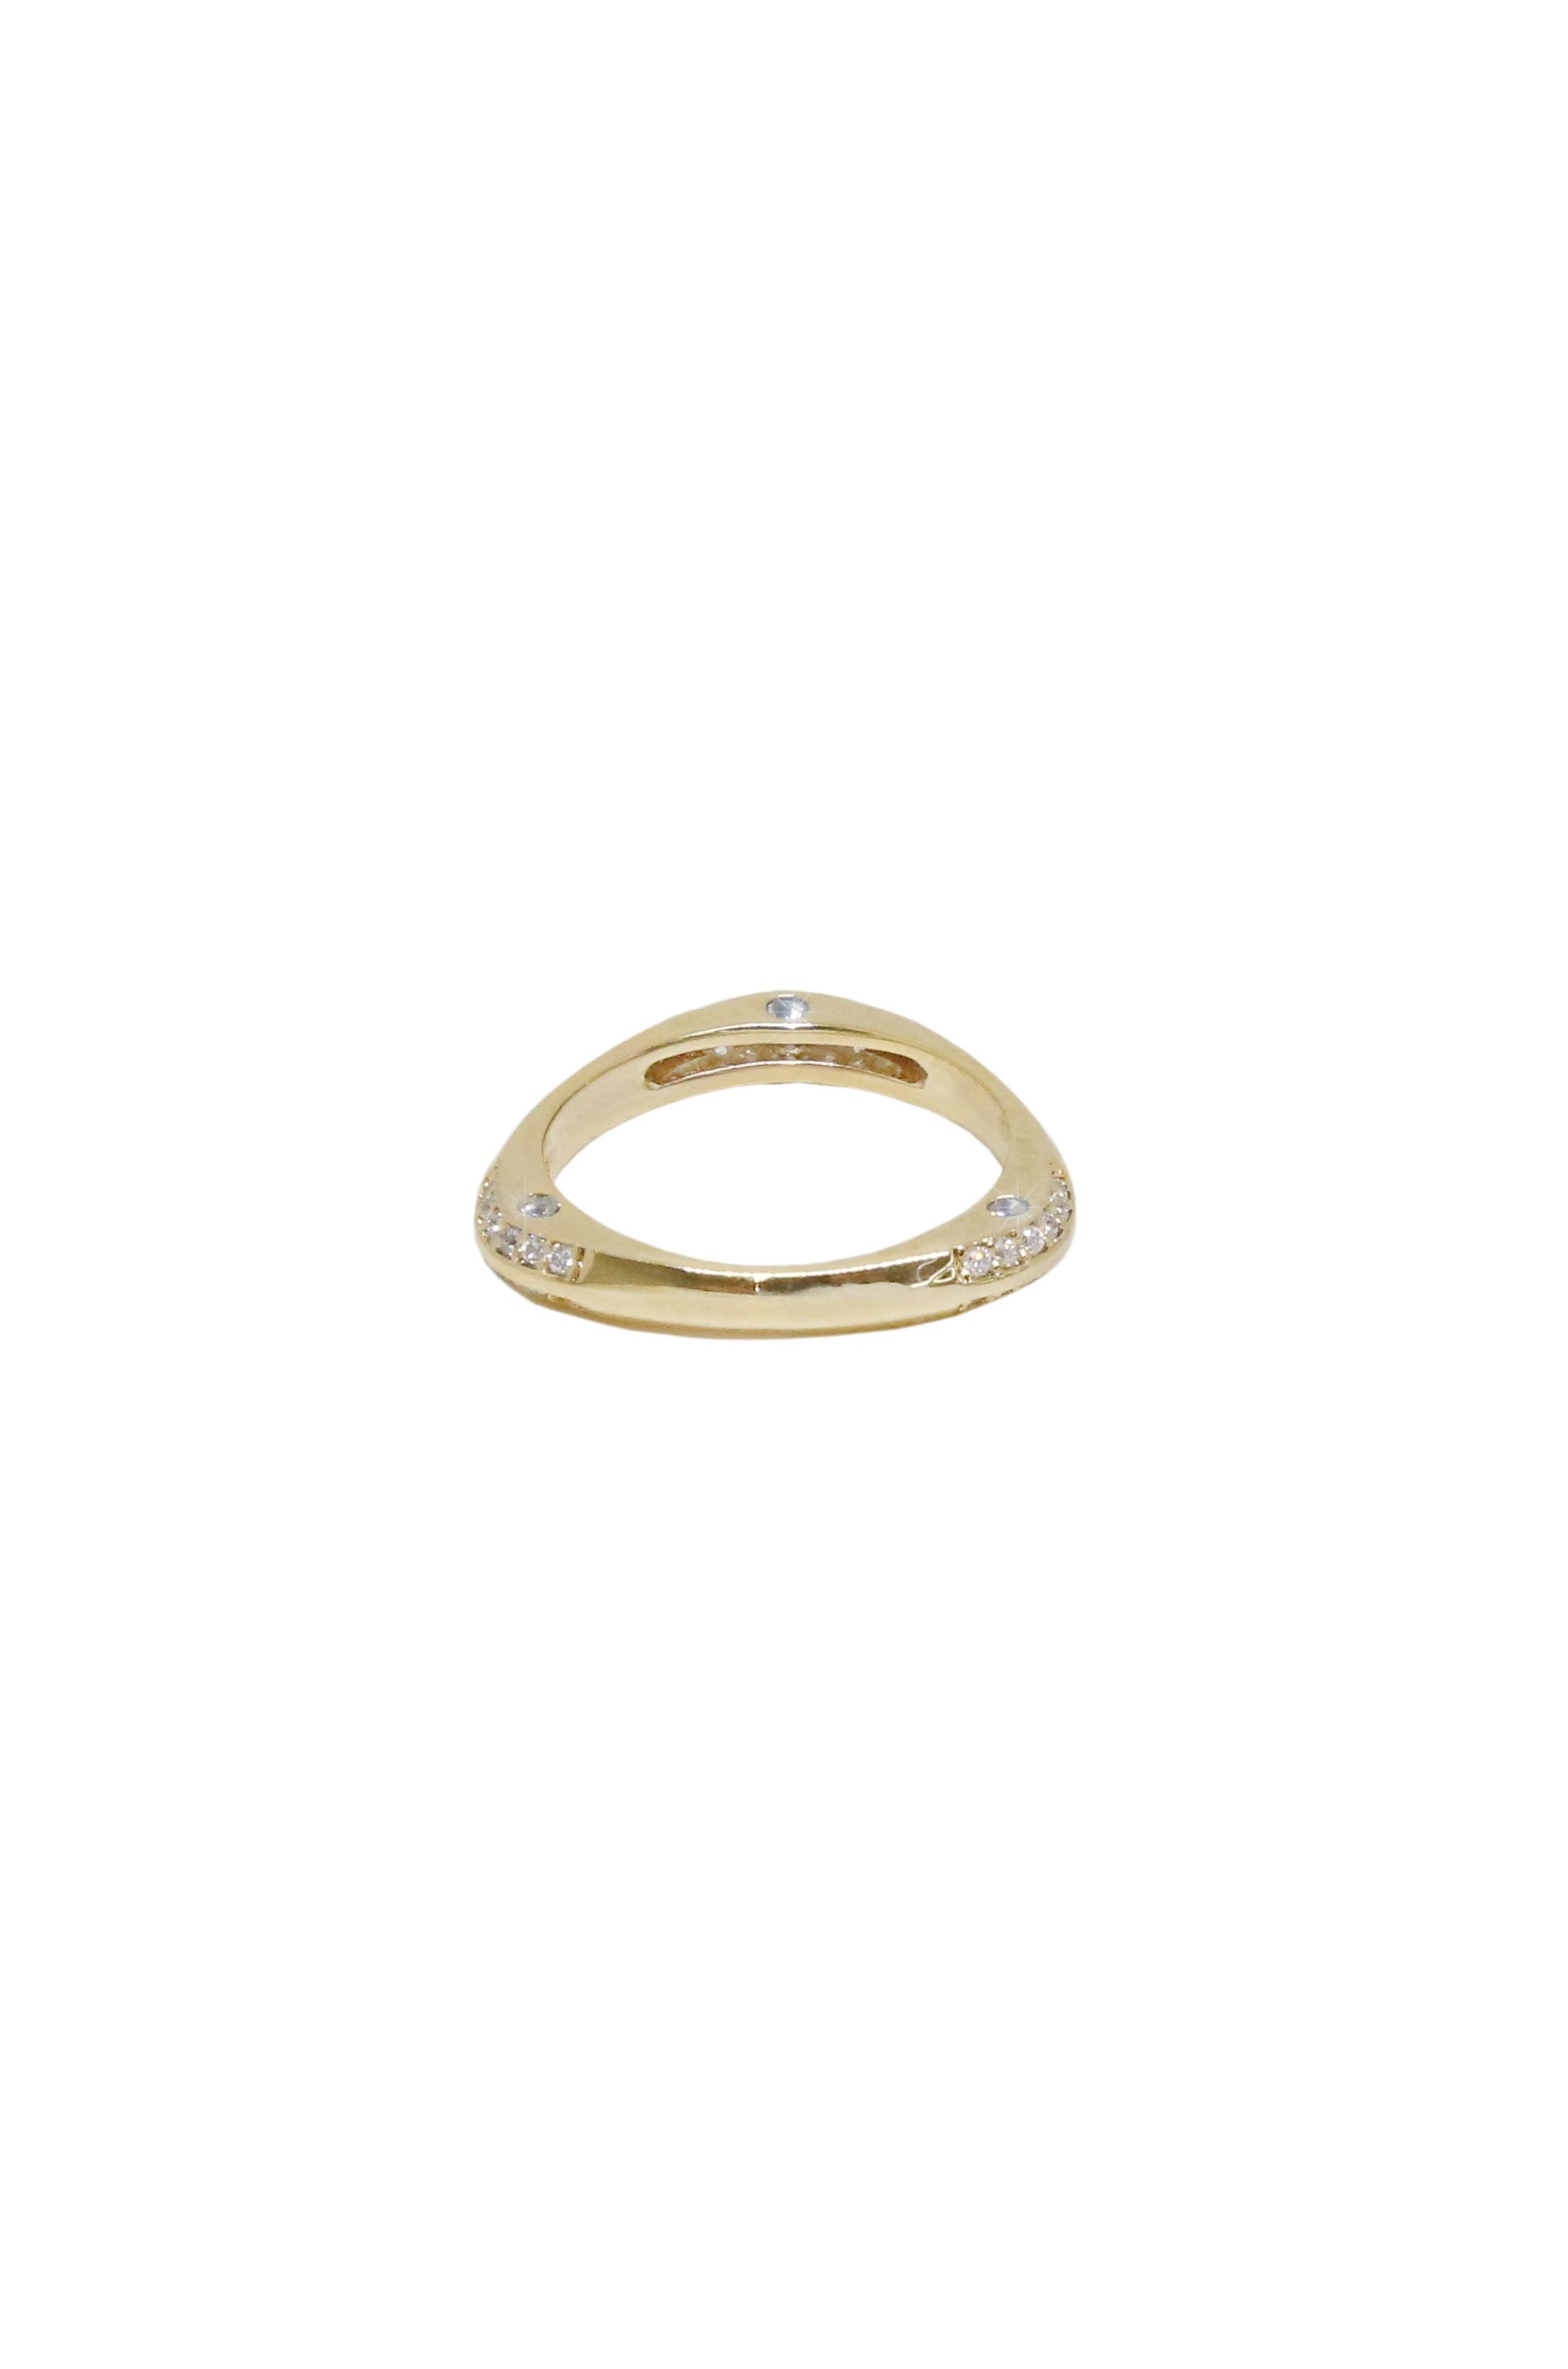 Star Dusted 18k Gold Plated Ring on white background  